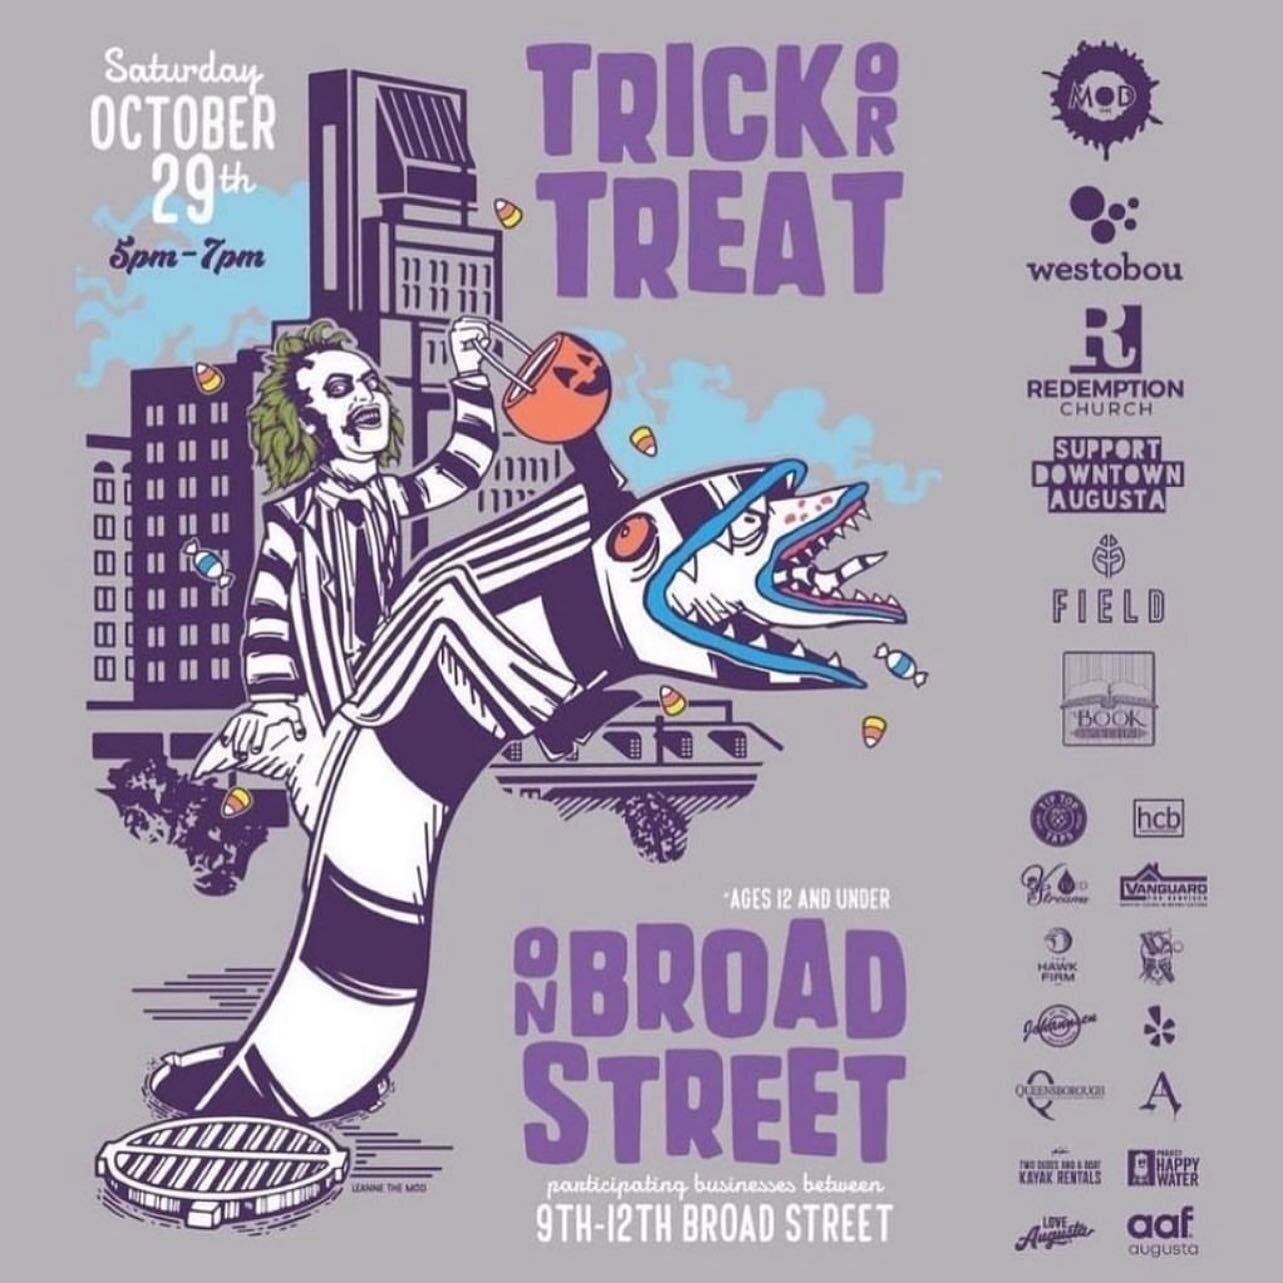 Keep Downtown Augusta s p o o k y👻

It&rsquo;s time for the 3rd Annual Support Downtown Augusta Trick or Treat on Broad Street! Dress up in your best Halloween costume and trick or treat from business to business between 9th-12th Street.

Event will